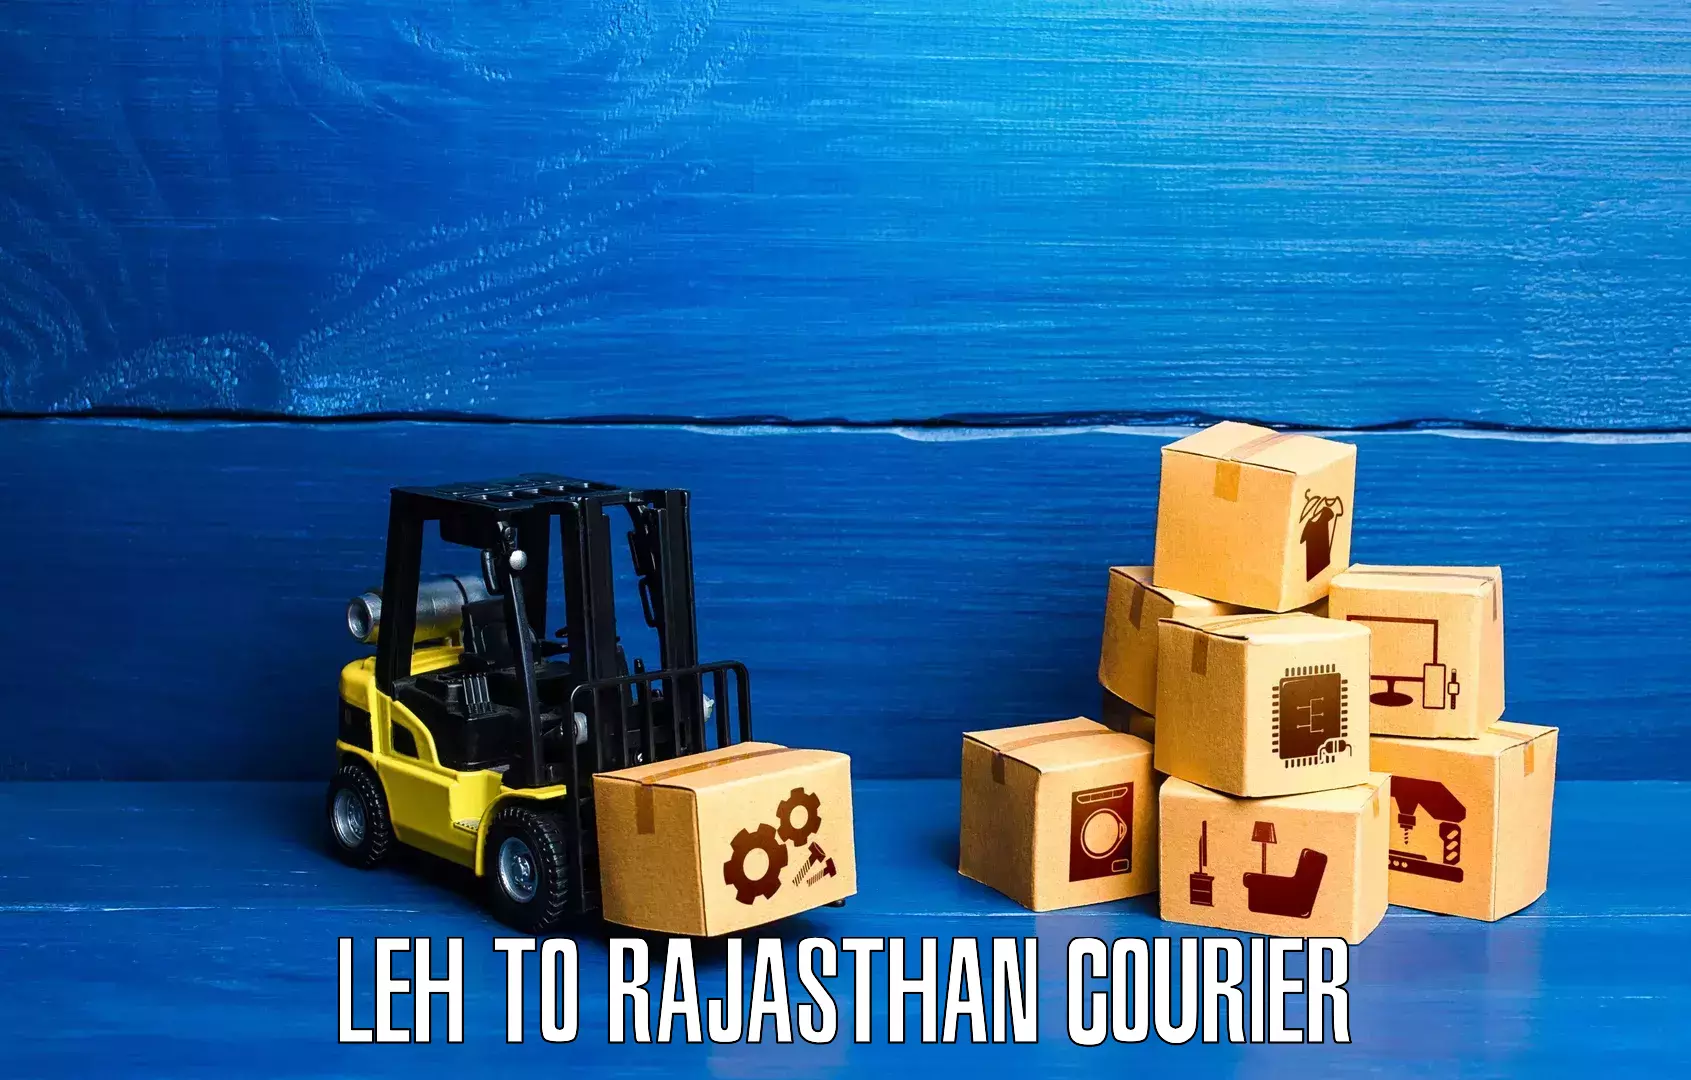 International courier networks Leh to Rajasthan